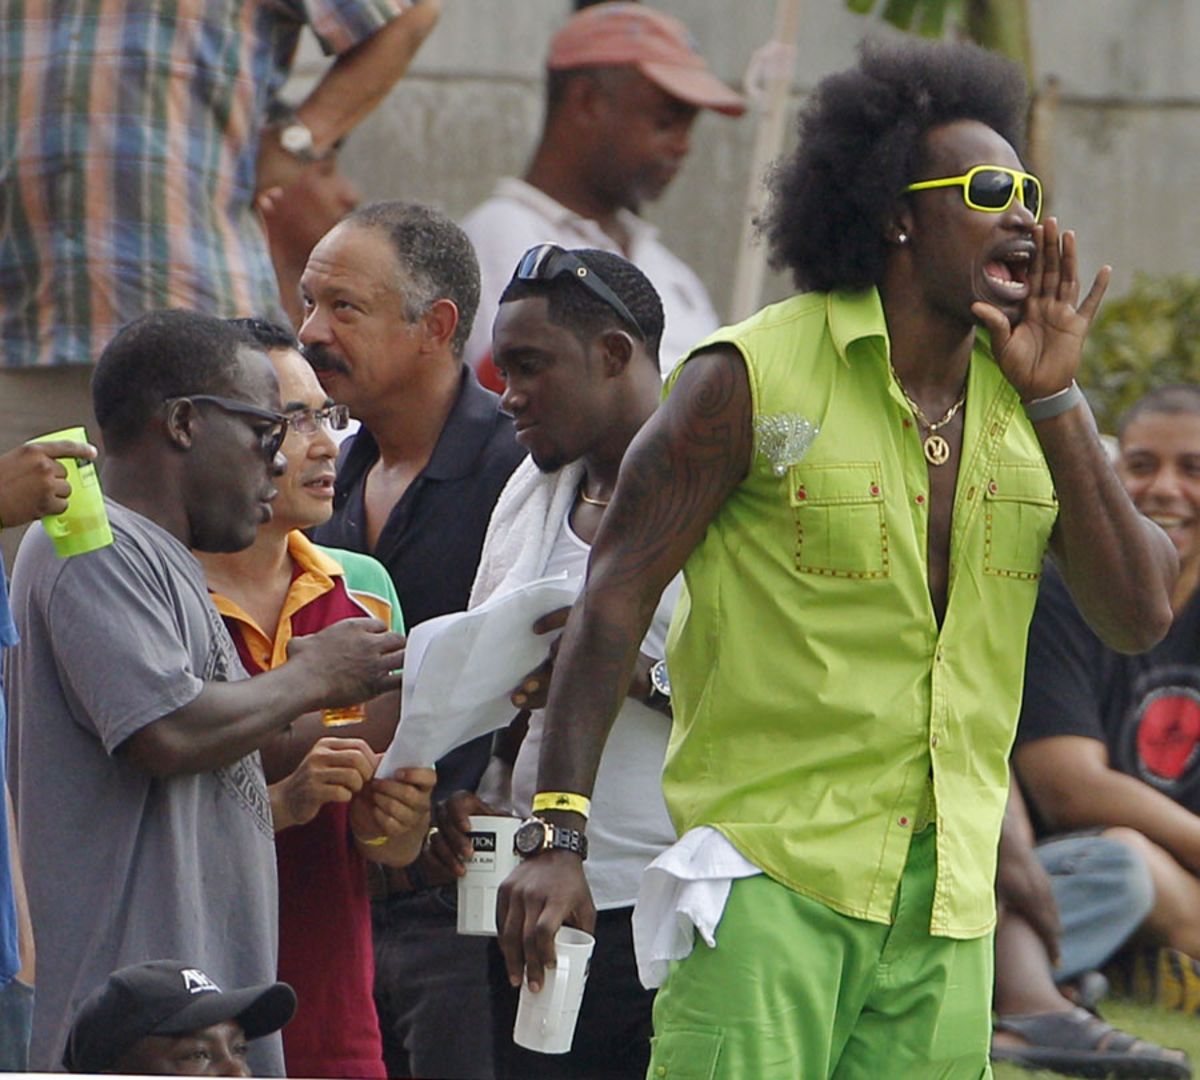 Chris Gayle shows off his flamboyant new hairstyle 